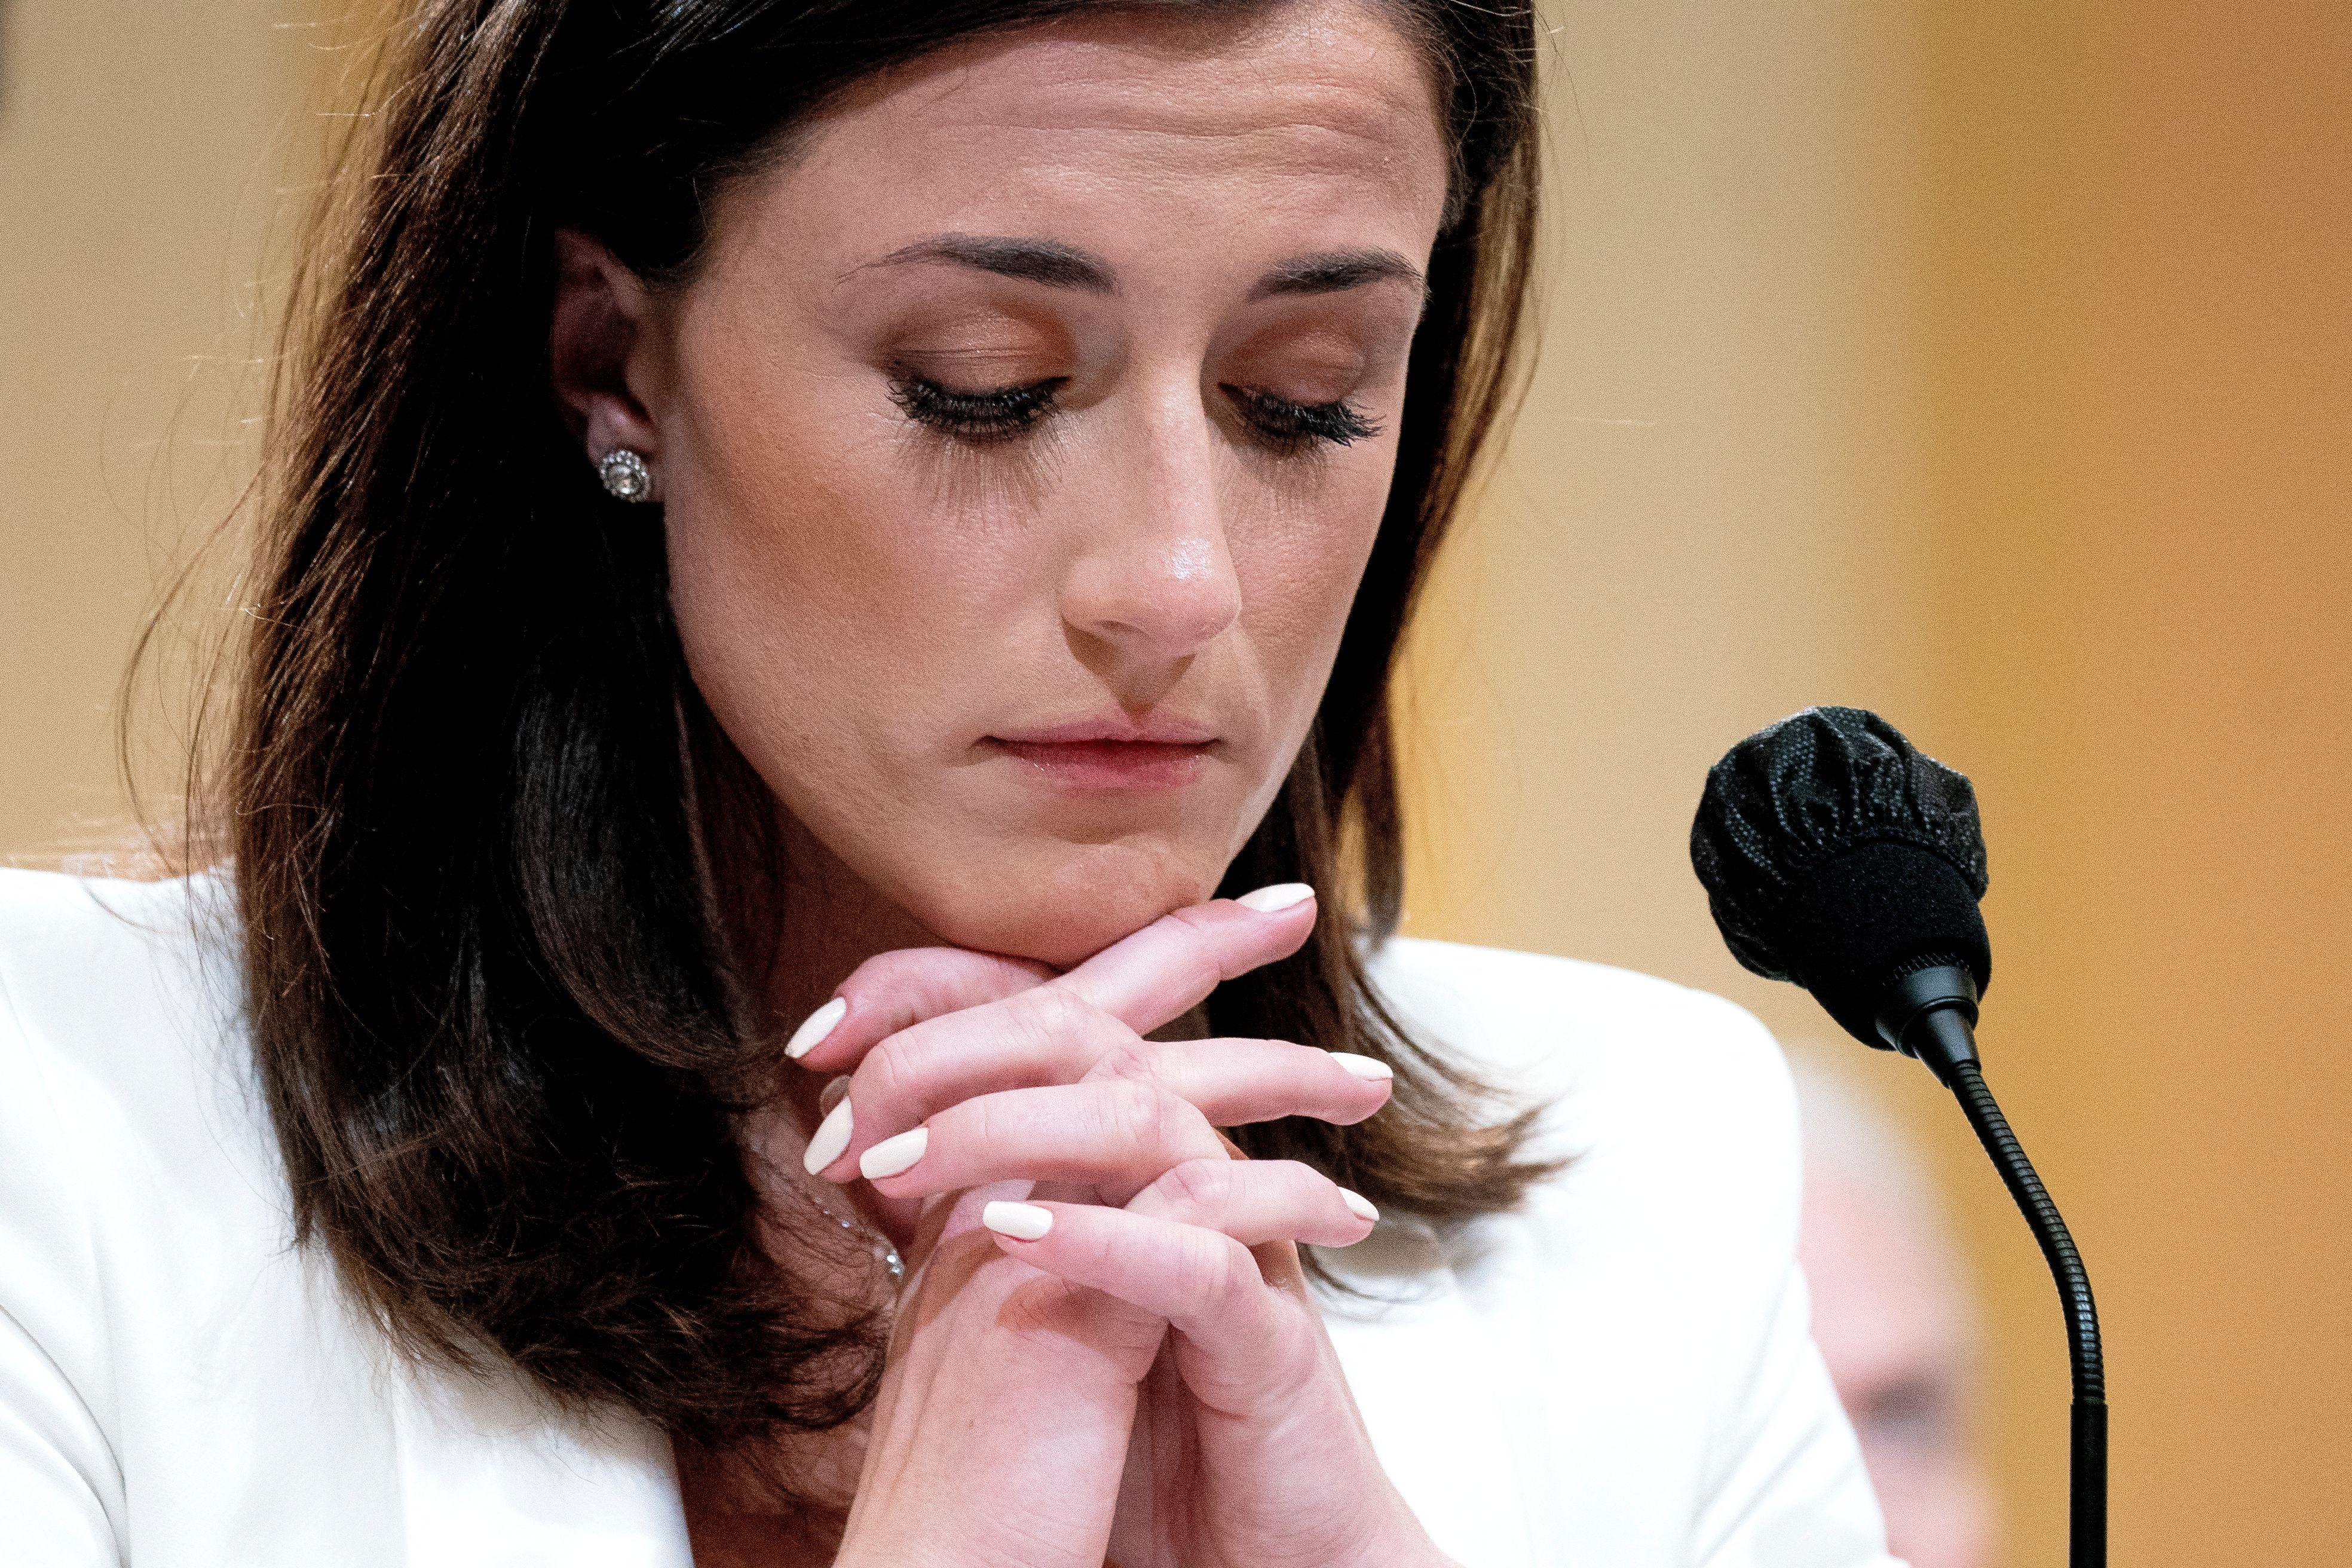 Cassidy Hutchinson, a top aide to former White House Chief of Staff Mark Meadows, listens during the sixth hearing by the House Select Committee to Investigate the January 6th Attack on the US Capitol, in the Cannon House Office Building in Washington, DC, on June 28, 2022. Her hands are clasped under her chin.